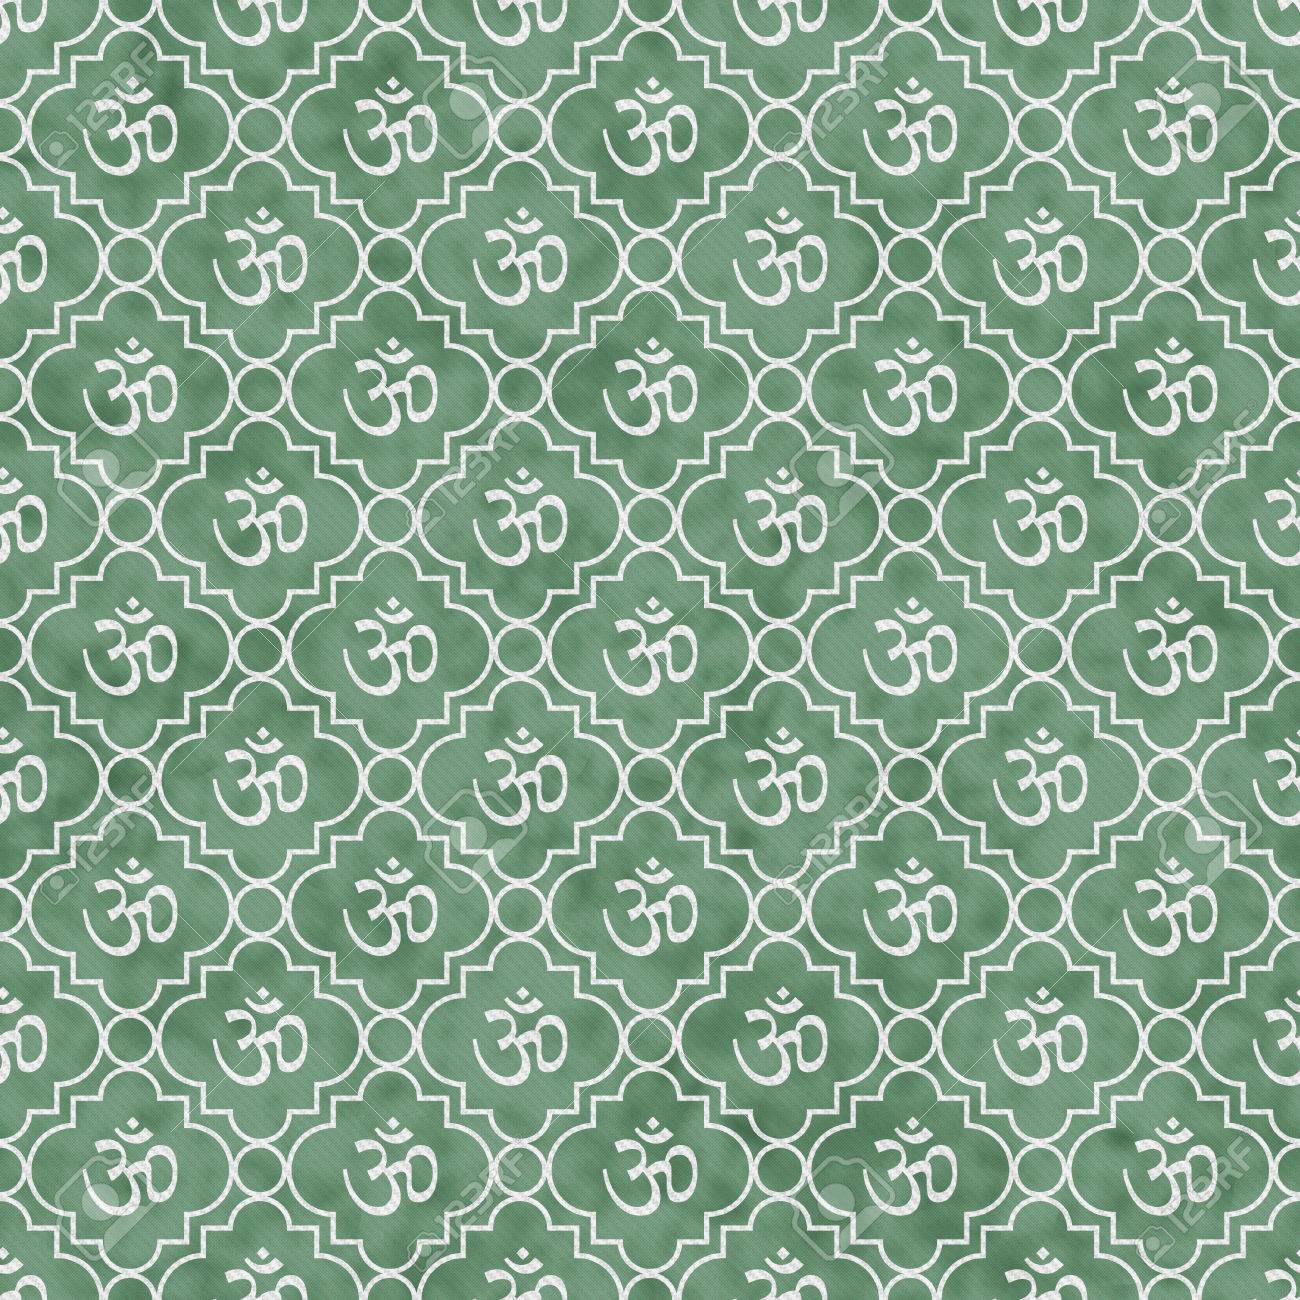 Green And White Aum Hindu Symbol Tile Pattern Repeat Background